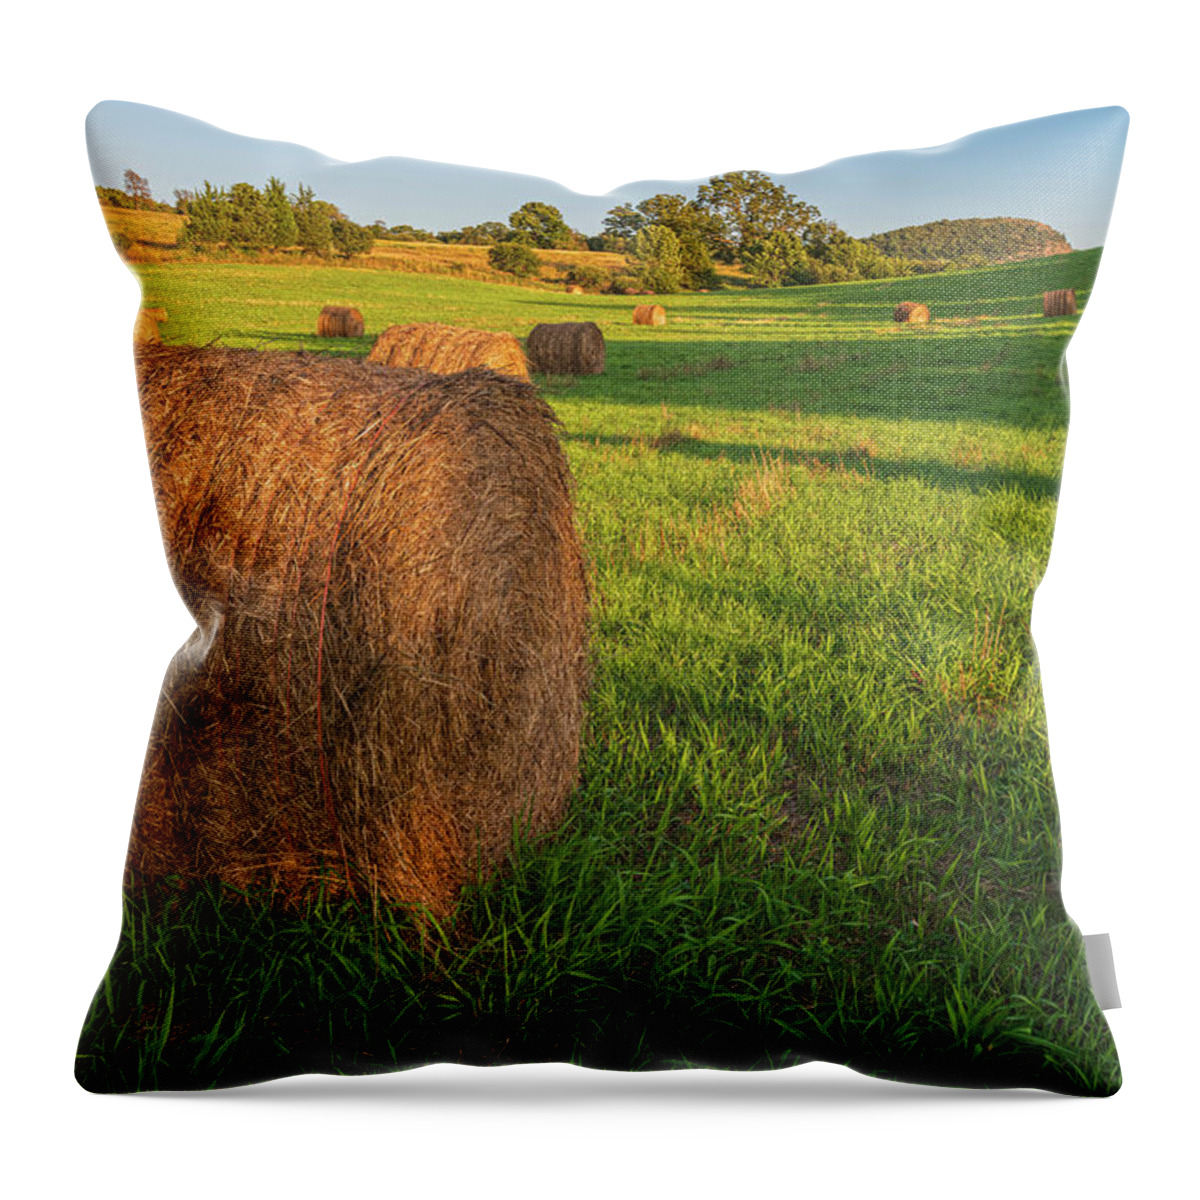 Hay Bales Throw Pillow featuring the photograph Knapp's View Hay Bales by Angelo Marcialis